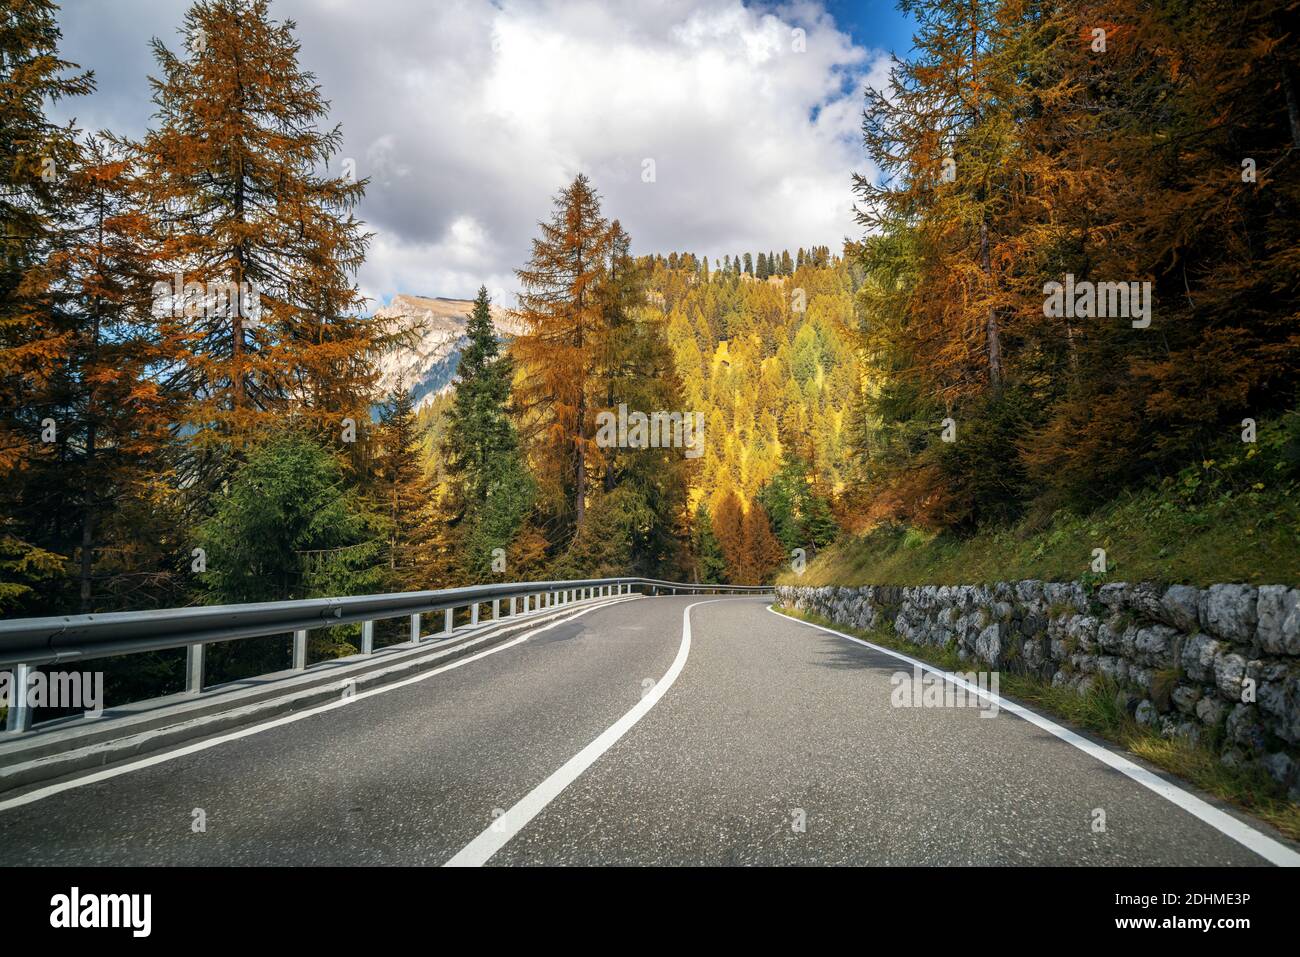 Beautiful mountain road with trees, forest and mountains in the backgrounds. Taken at state highway road of Dolomites mountain in Italy. Stock Photo